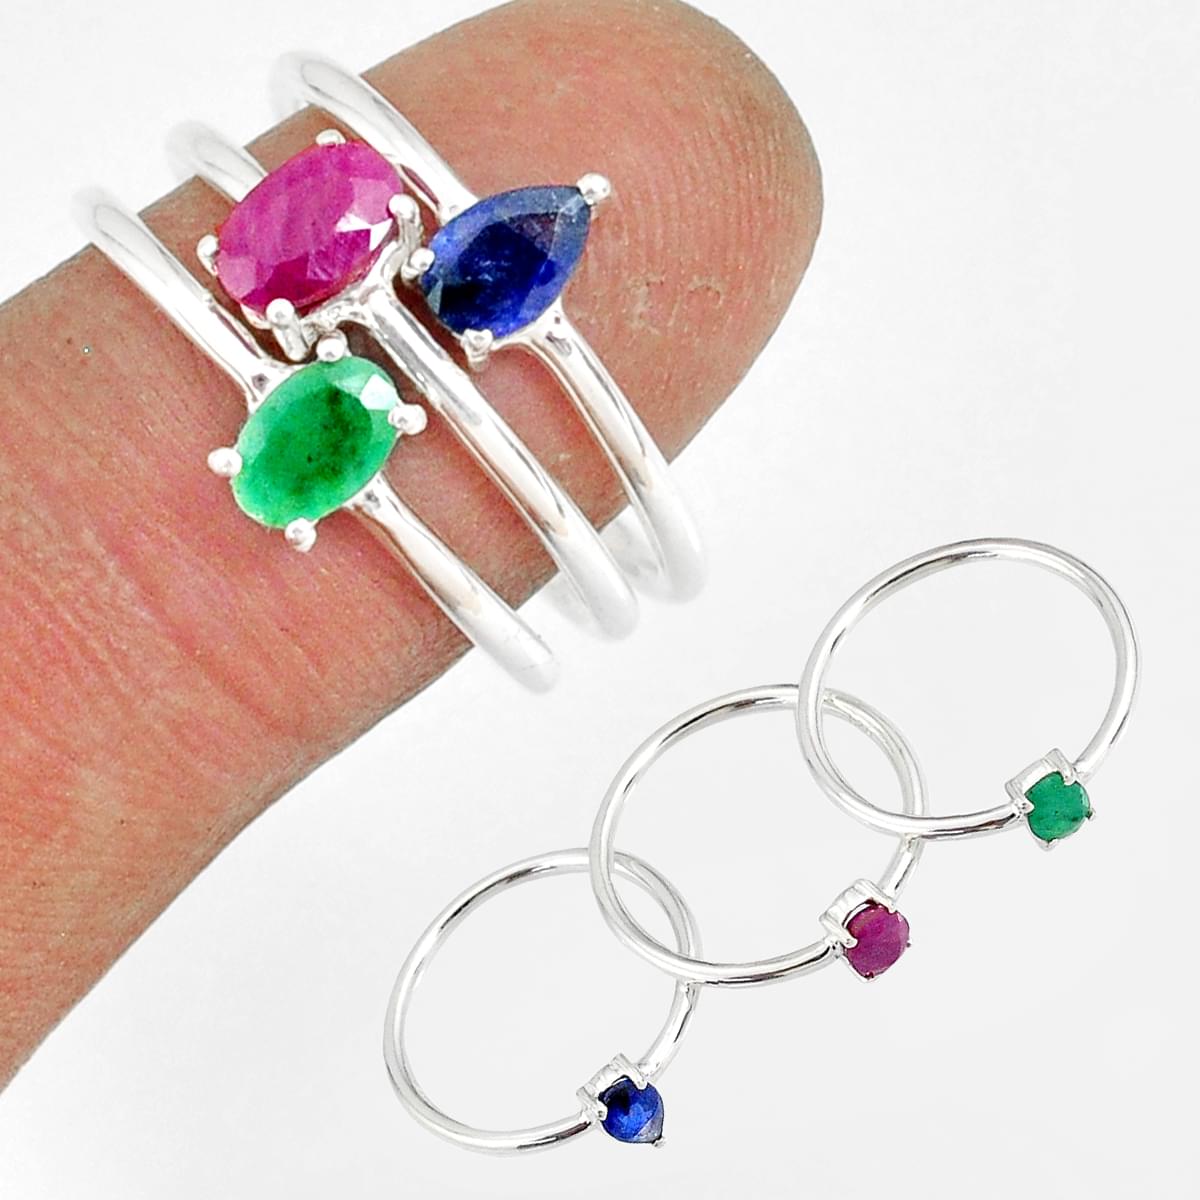 Details about   925 sterling silver Real Stone RUBY SAPPHIRE EMERALD & Marcasite BRACELET WOMEN